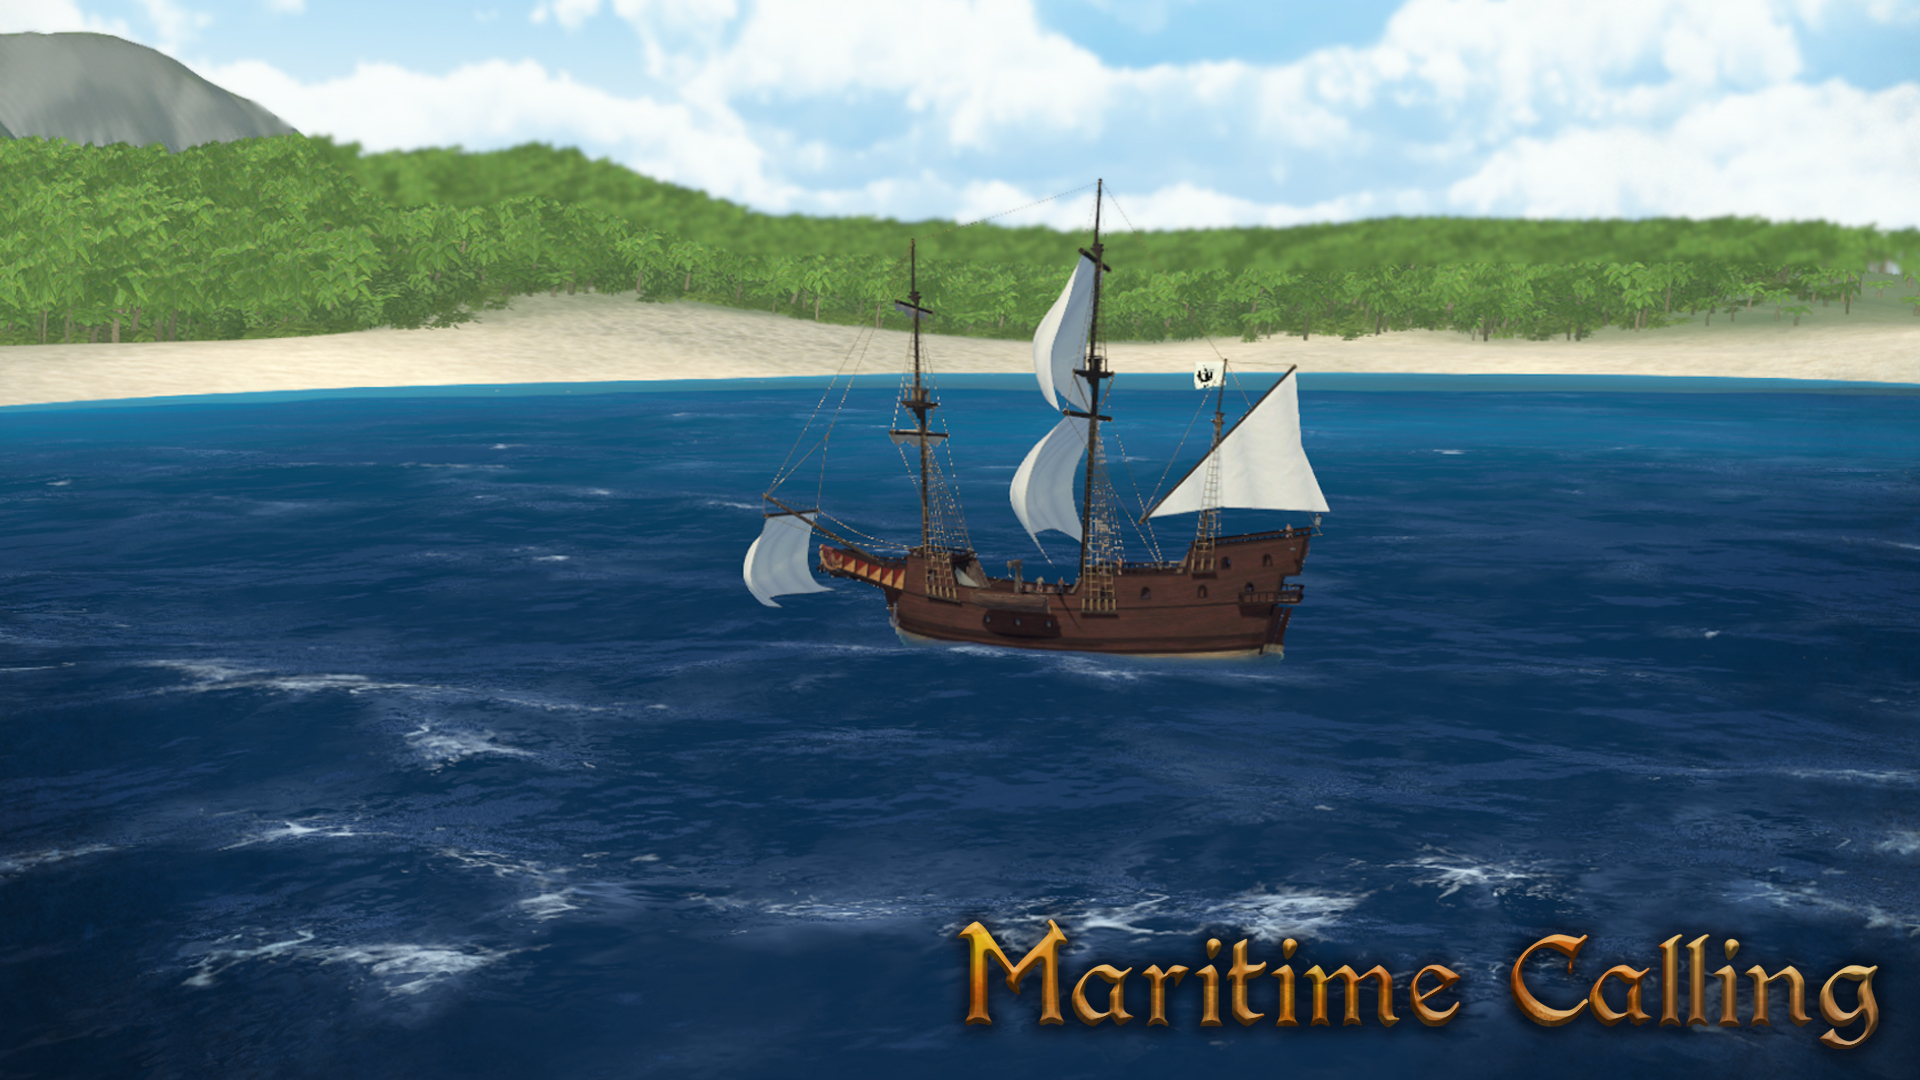 Maritime Calling download the new version for windows